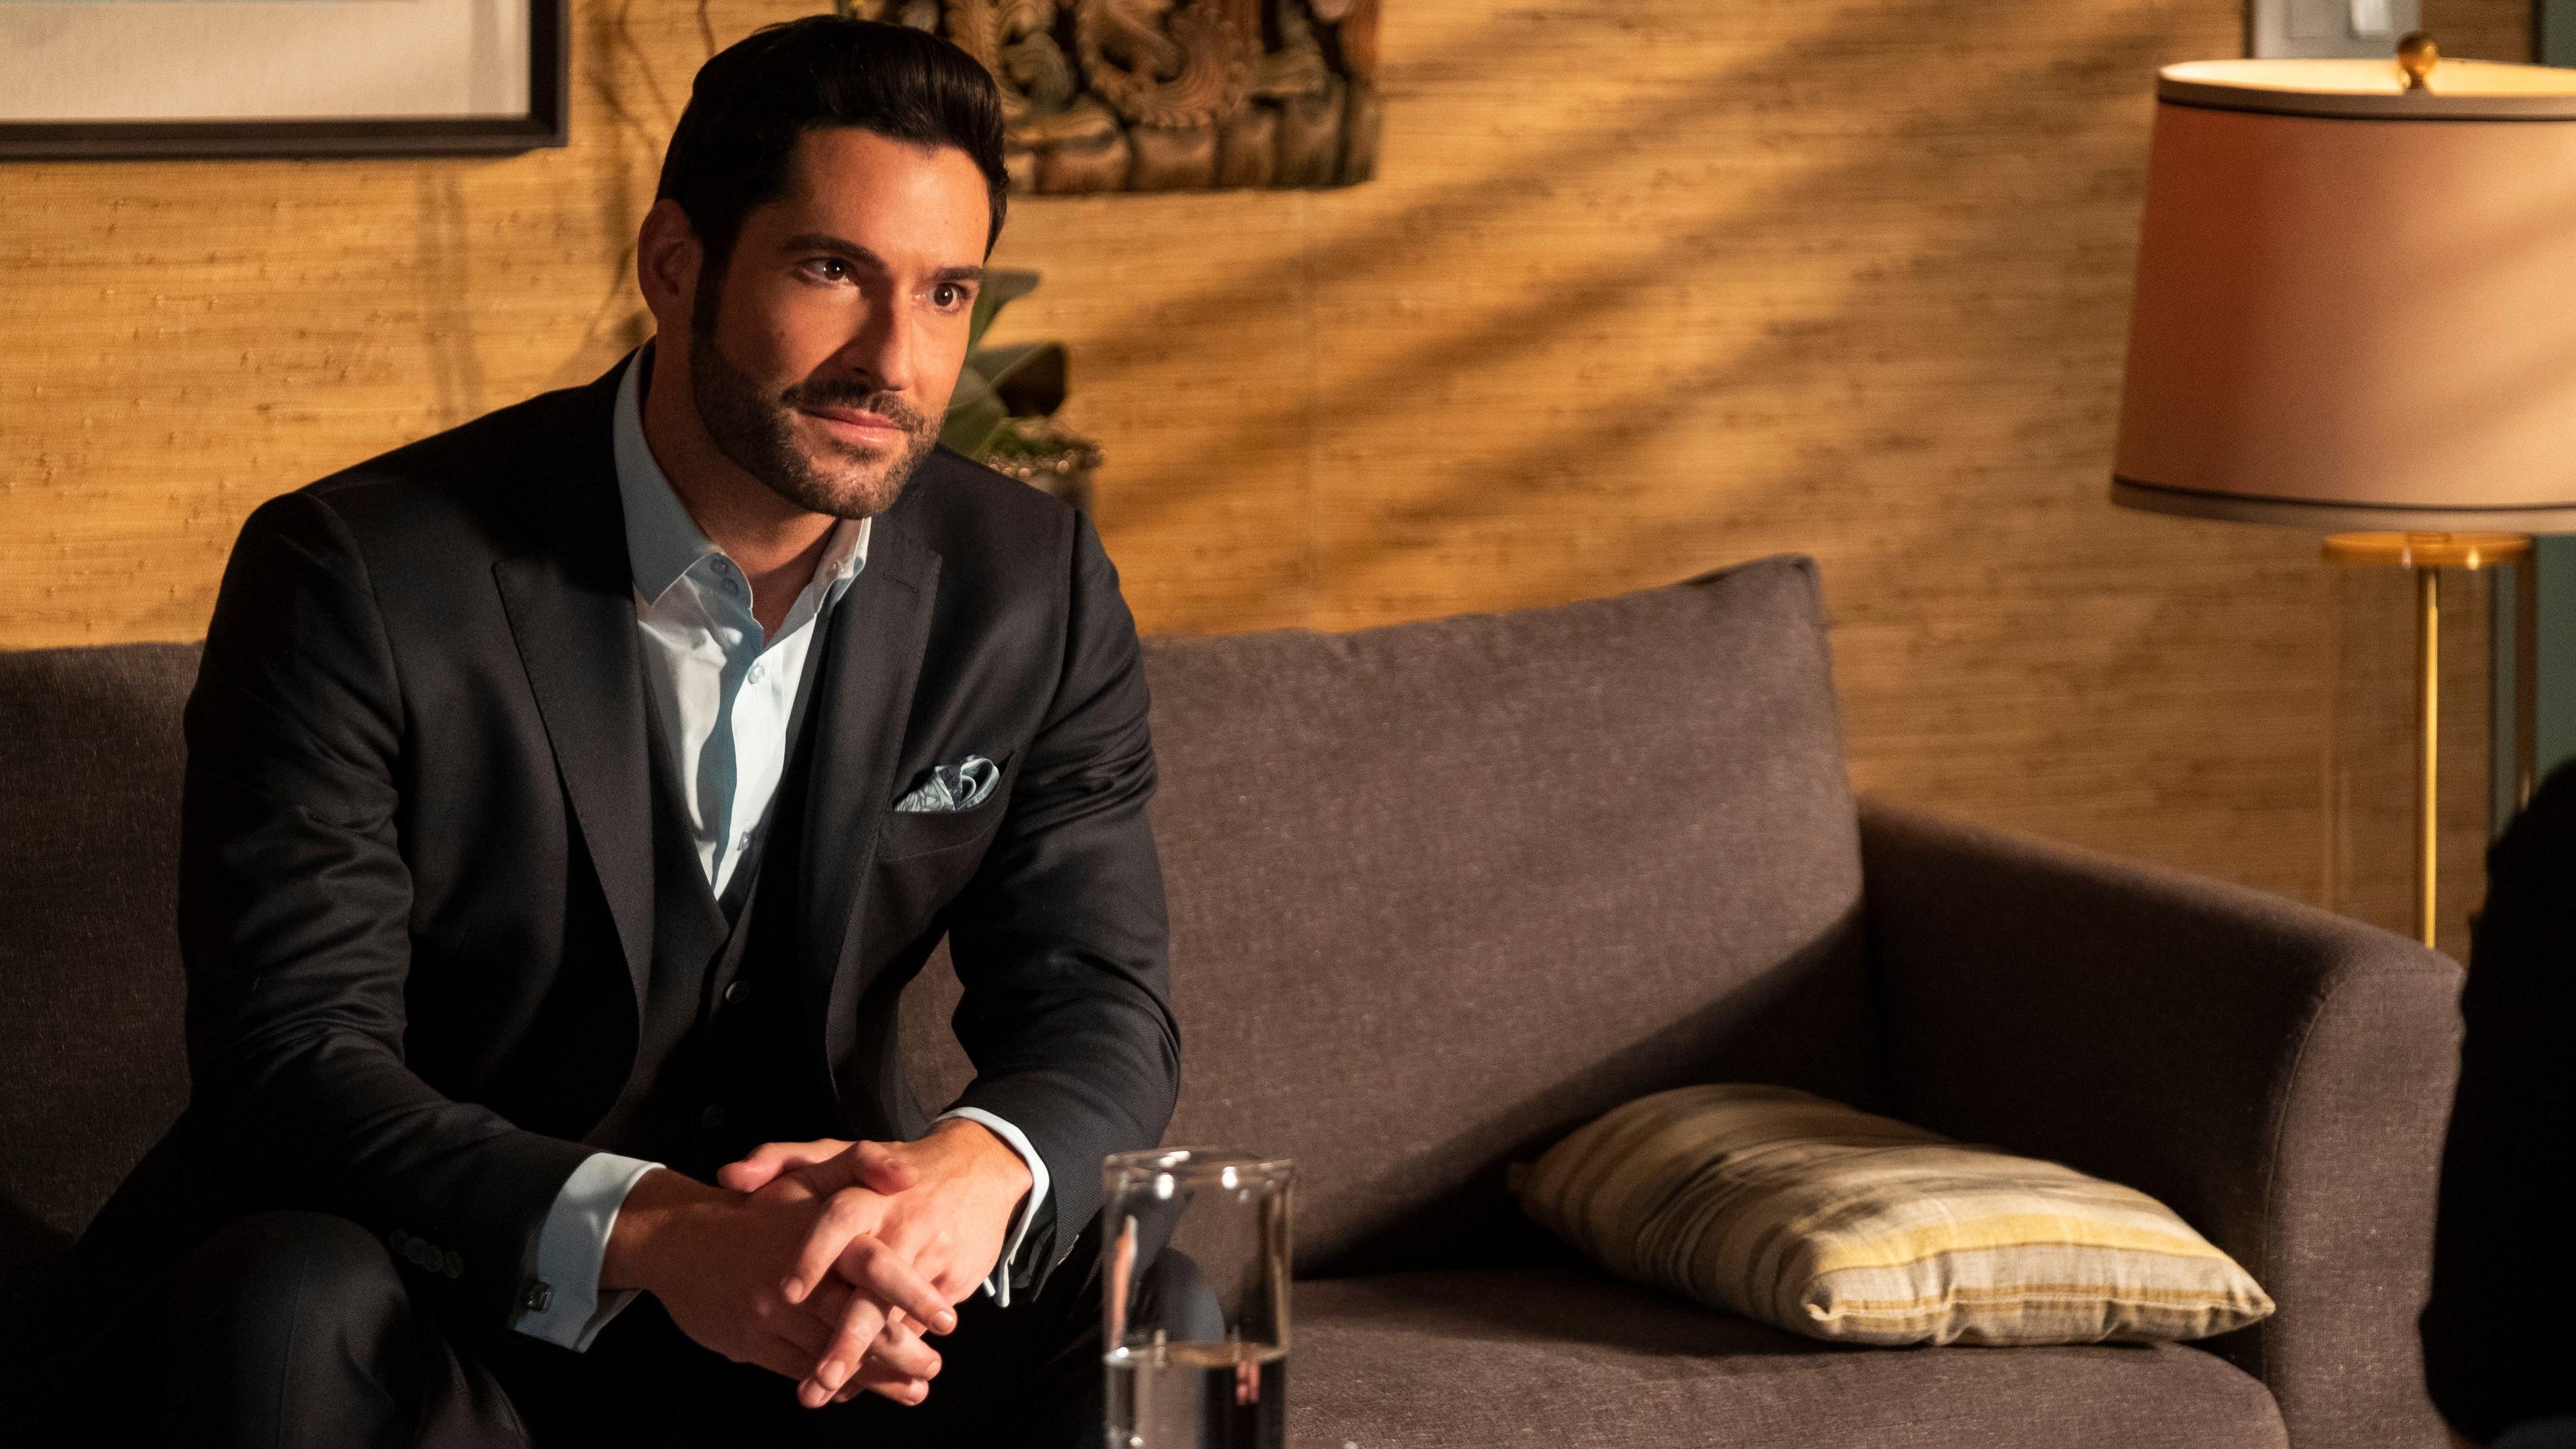 The devil gets his due in Lucifer’s satisfying final—for real this time—season